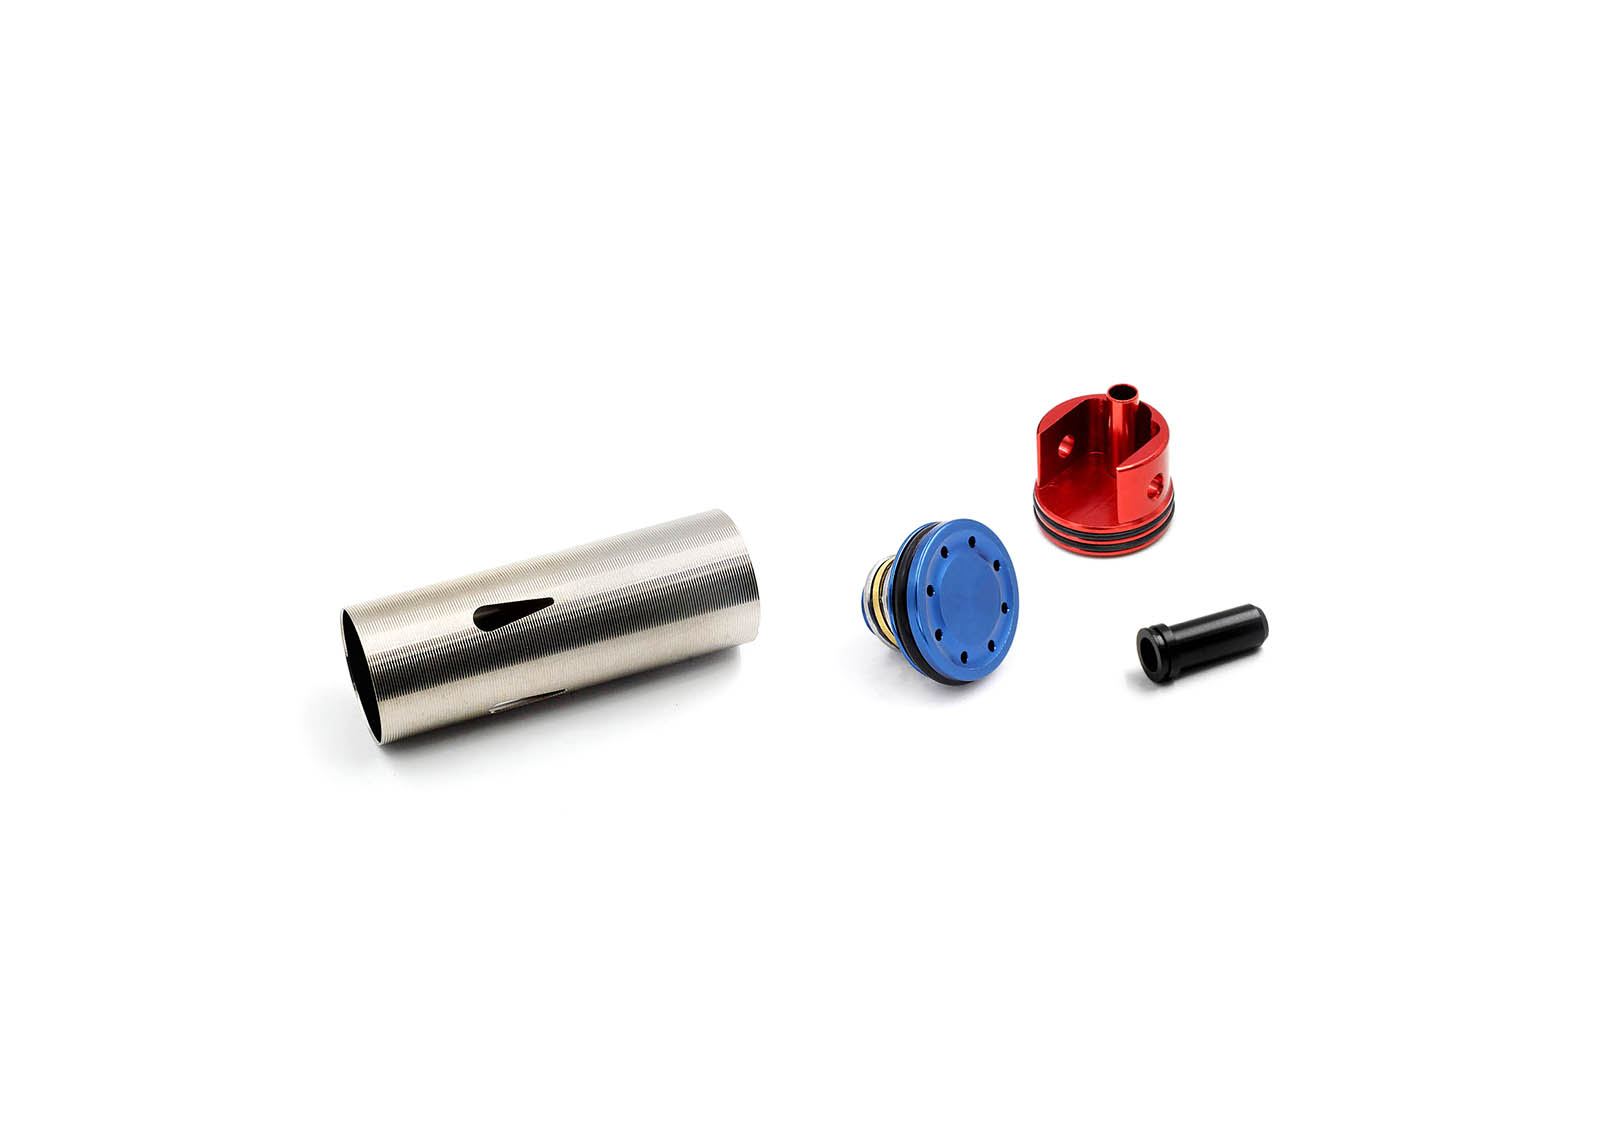 Bore up Cylinder Set for P90 - Modify AEG Airsoft parts